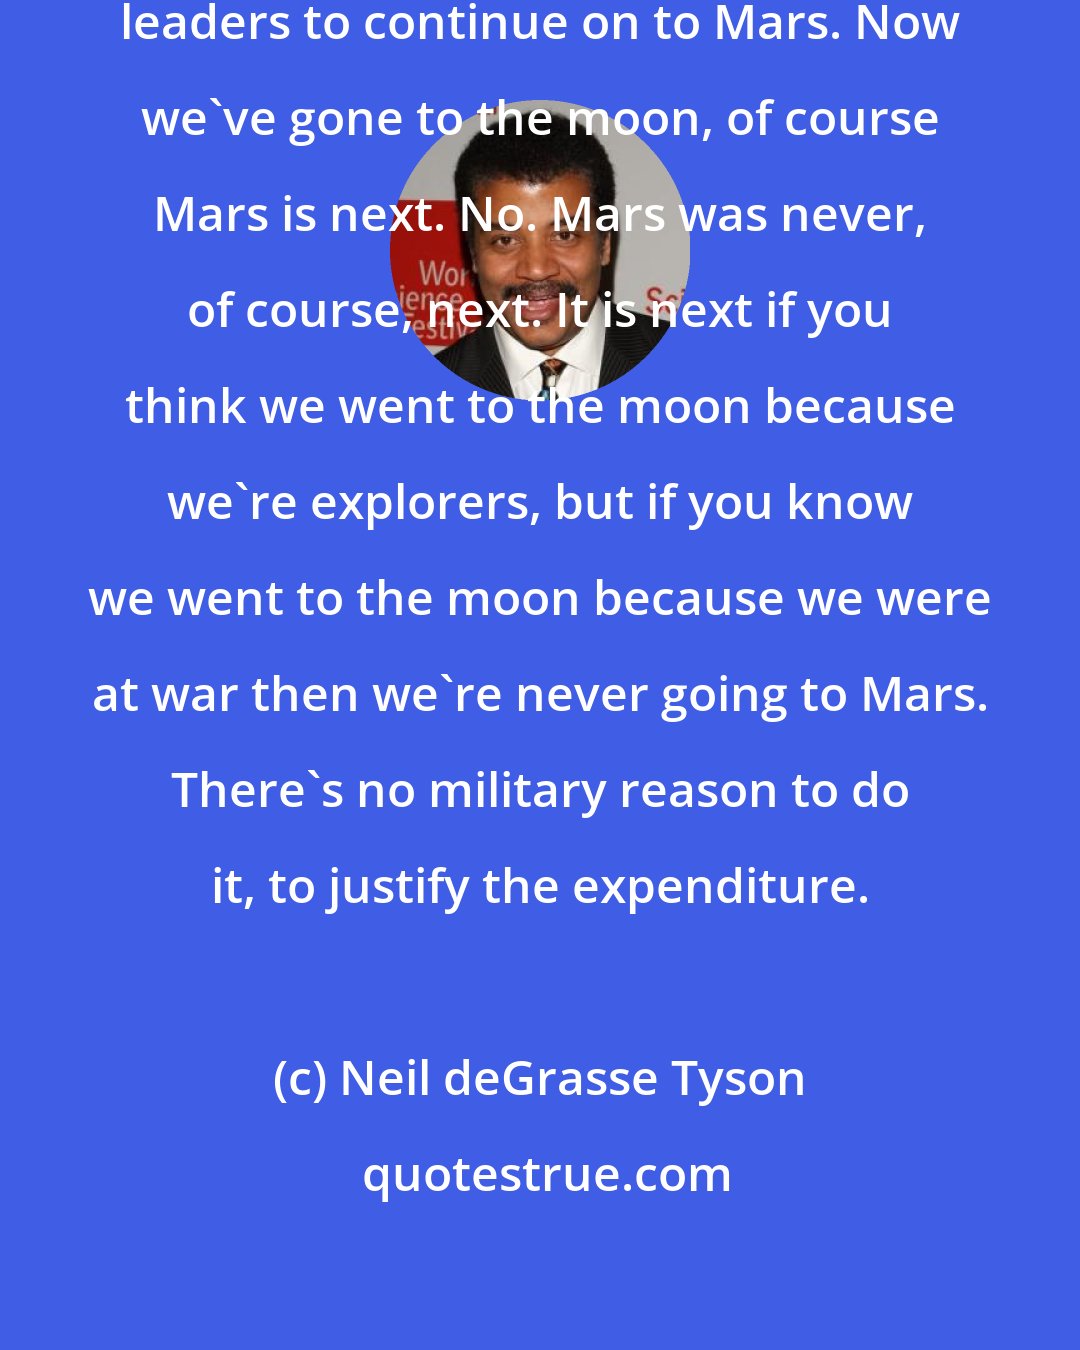 Neil deGrasse Tyson: People say, oh we just need charismatic leaders to continue on to Mars. Now we've gone to the moon, of course Mars is next. No. Mars was never, of course, next. It is next if you think we went to the moon because we're explorers, but if you know we went to the moon because we were at war then we're never going to Mars. There's no military reason to do it, to justify the expenditure.